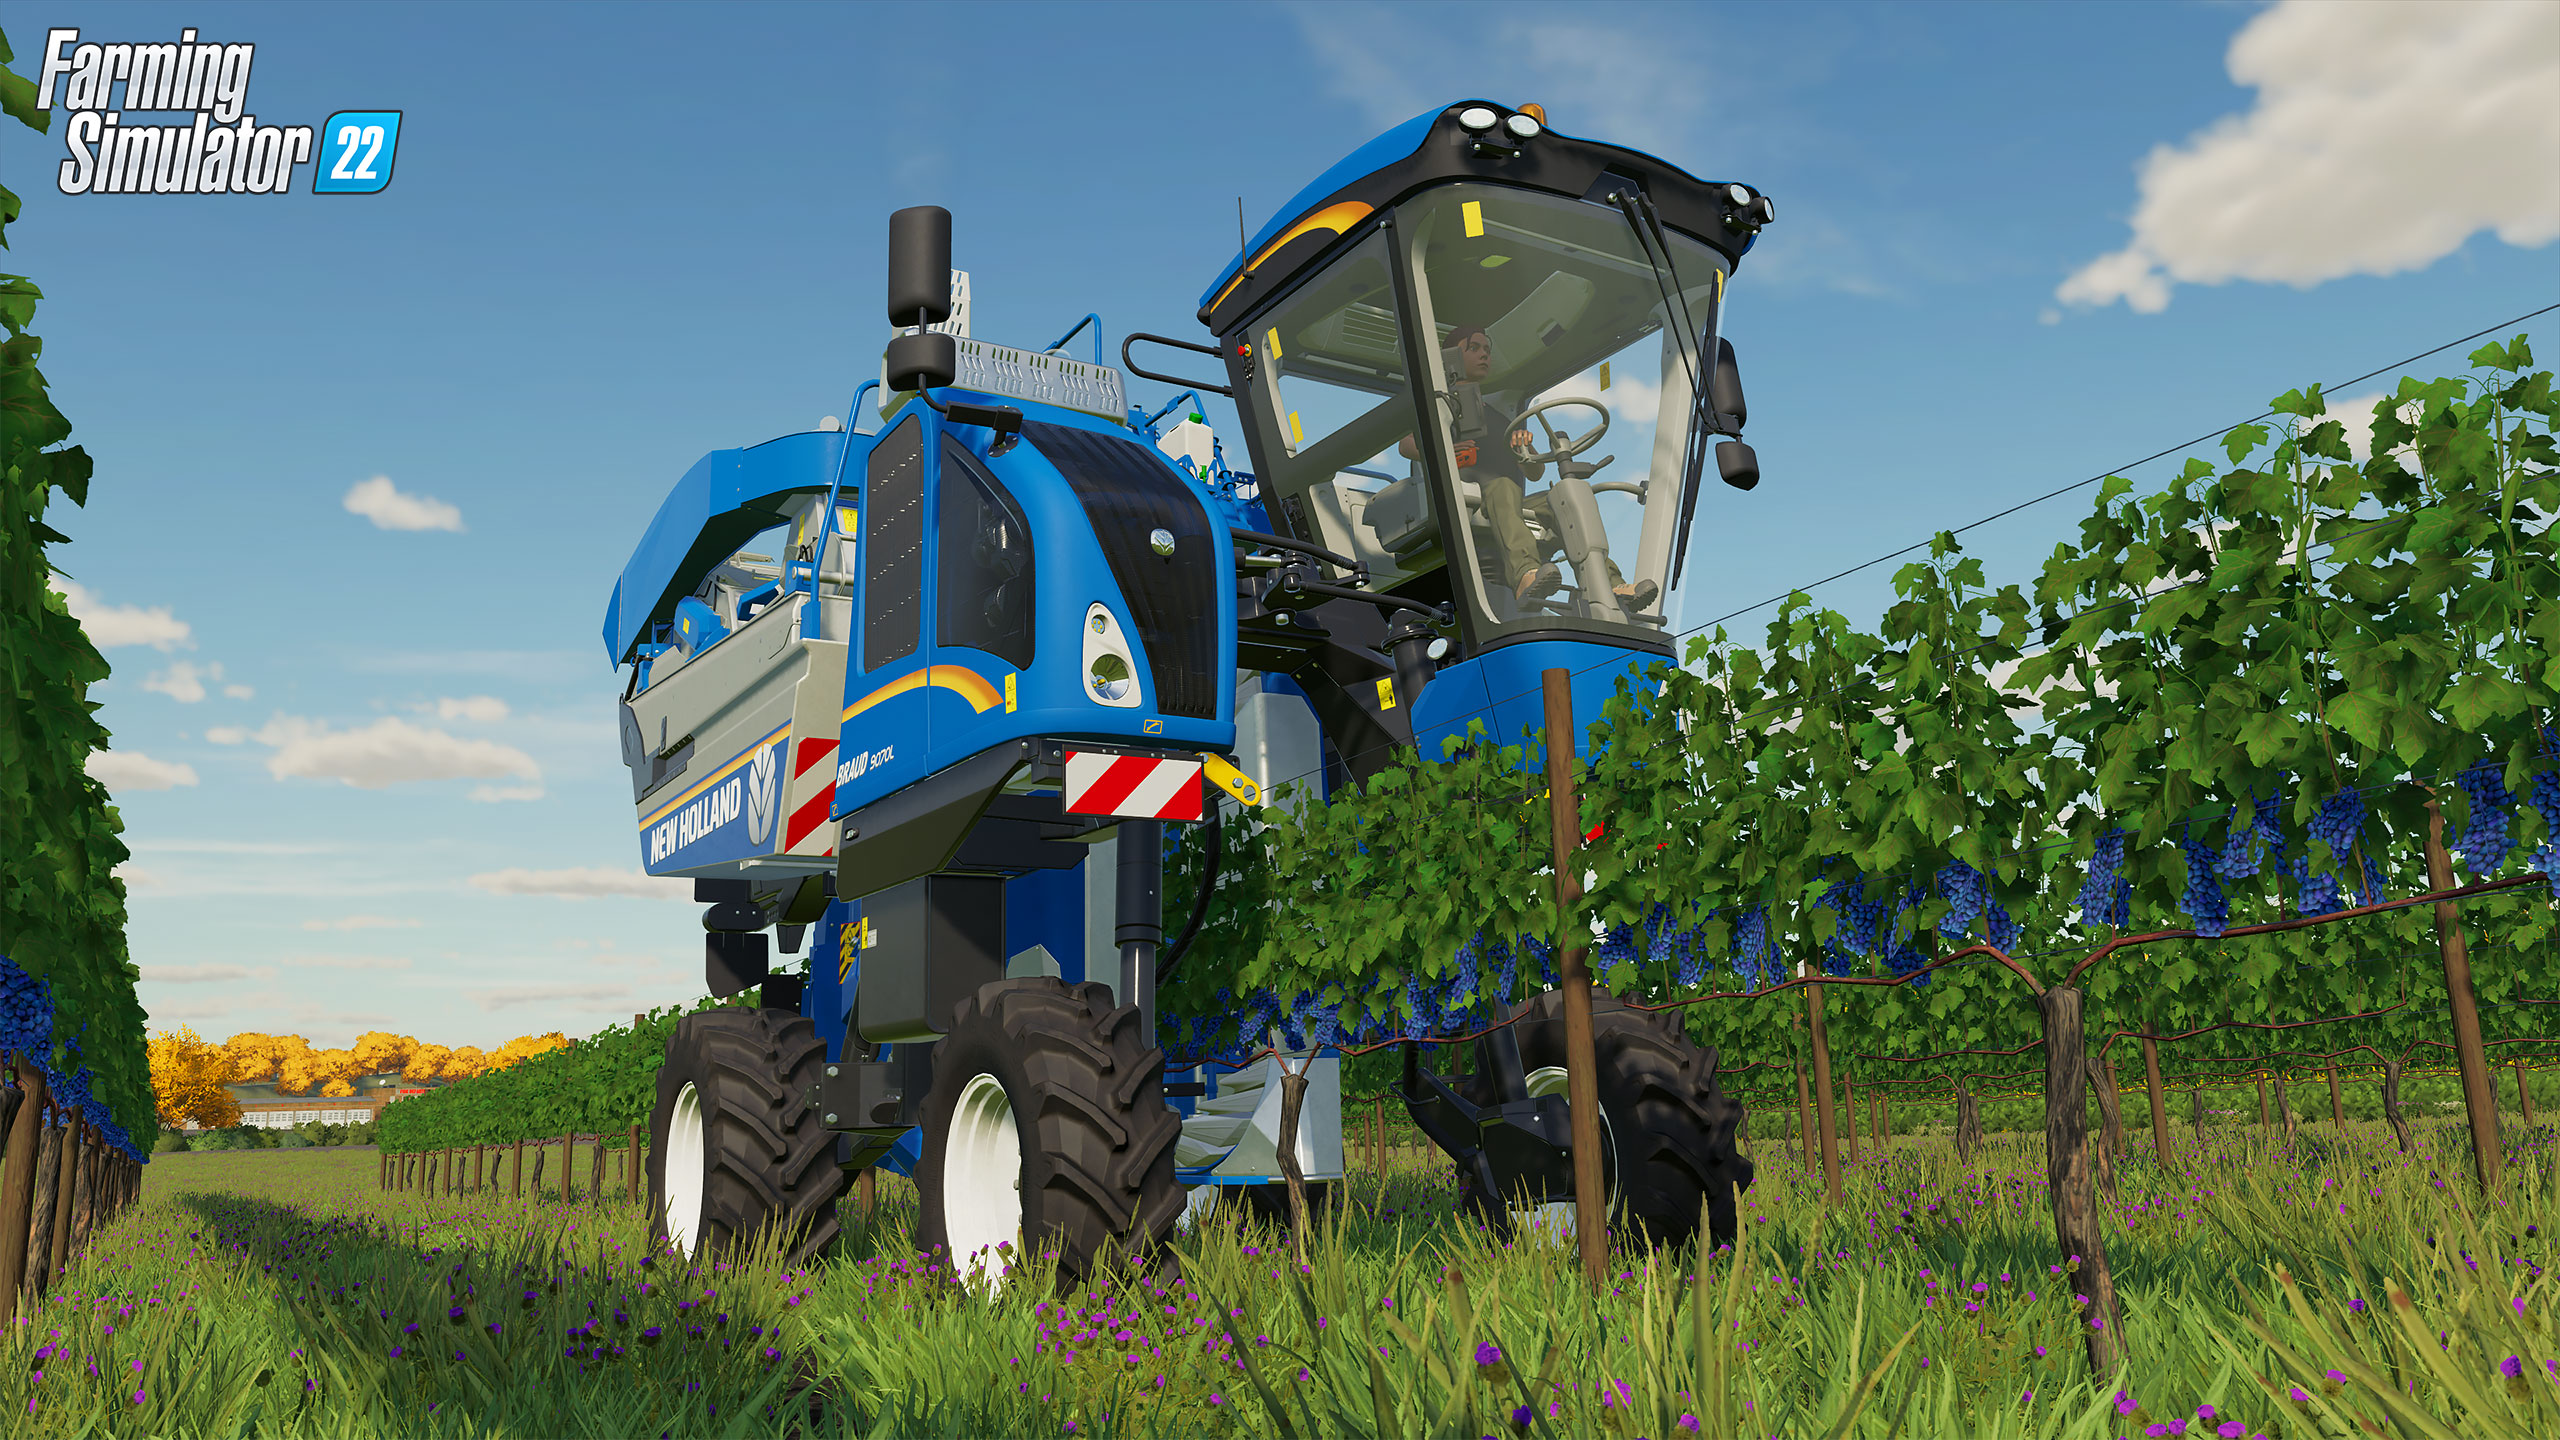 What's new in Farming Simulator 22?